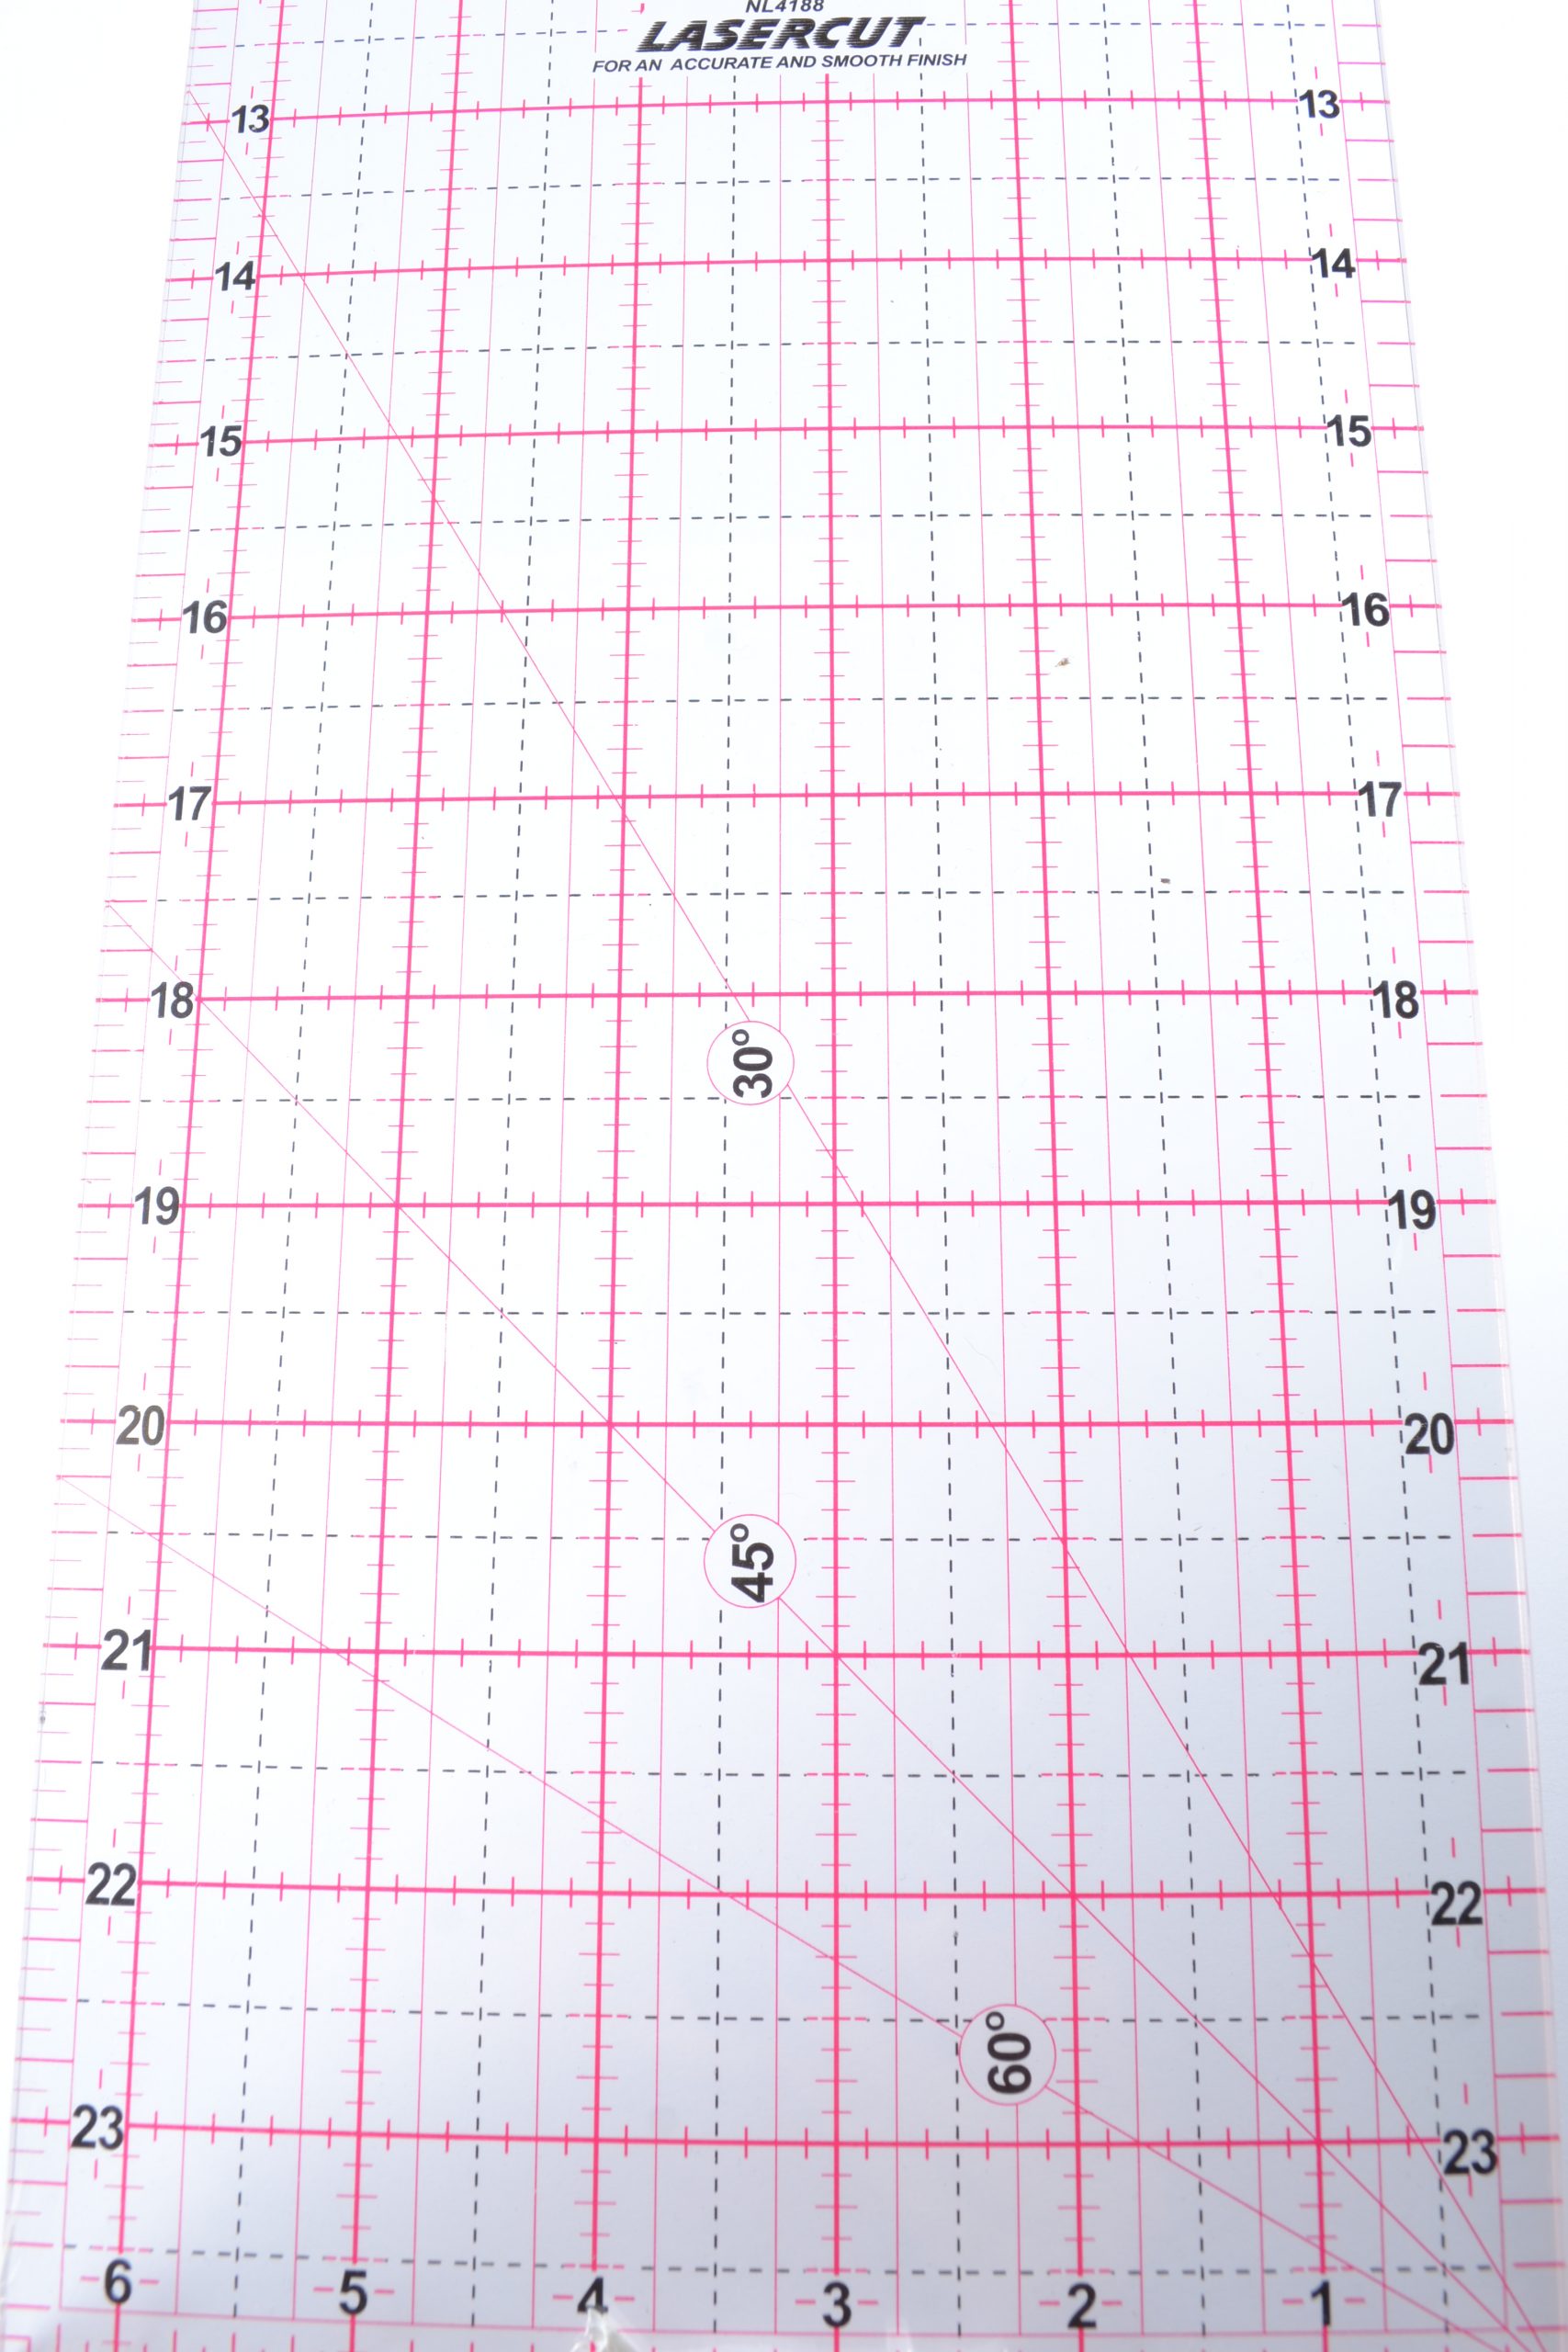 Fabric Ruler  Sew Easy Quilting & Patchwork Ruler (24x6.5)